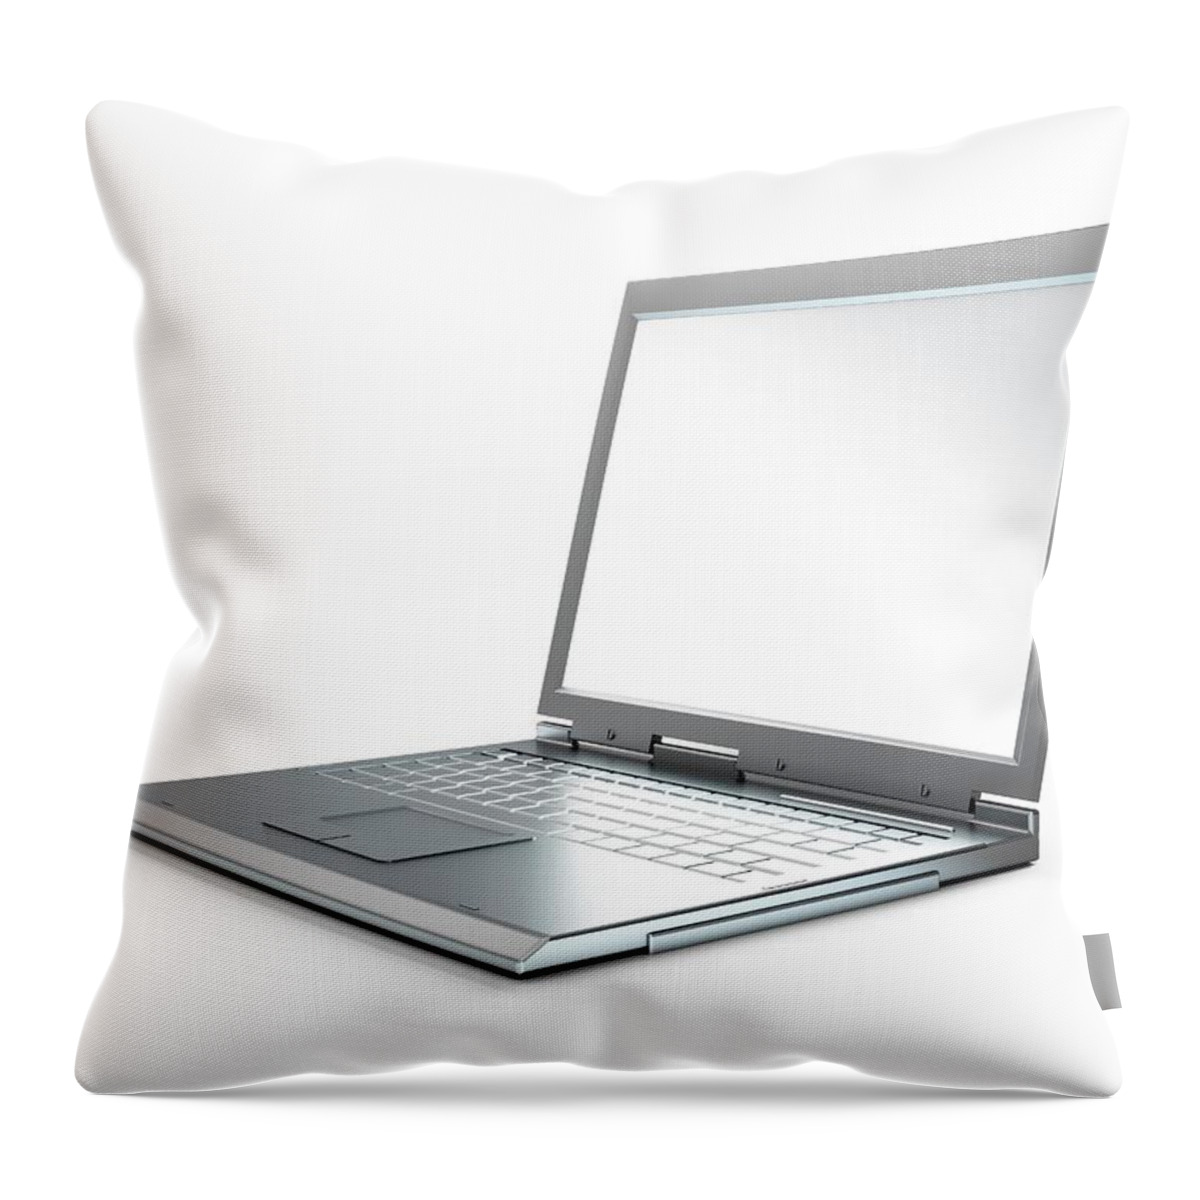 White Background Throw Pillow featuring the digital art Laptop Computer, Artwork #1 by Leonello Calvetti